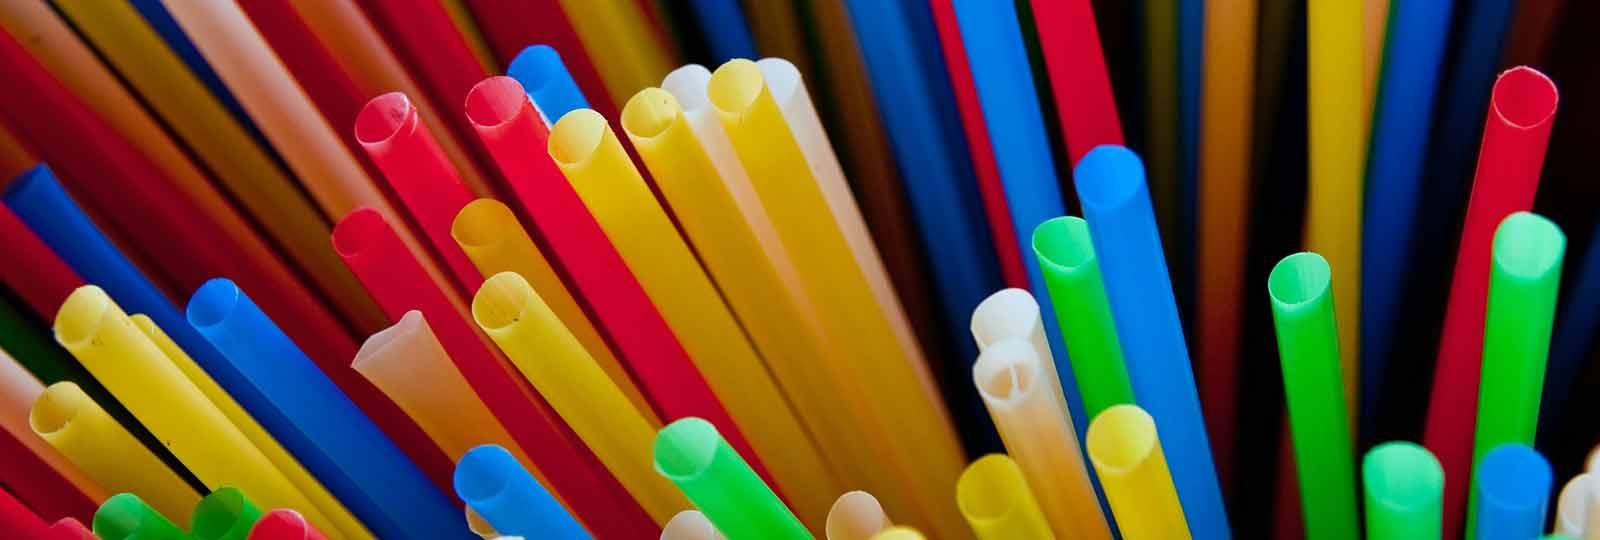 By Law: No to plastic straws